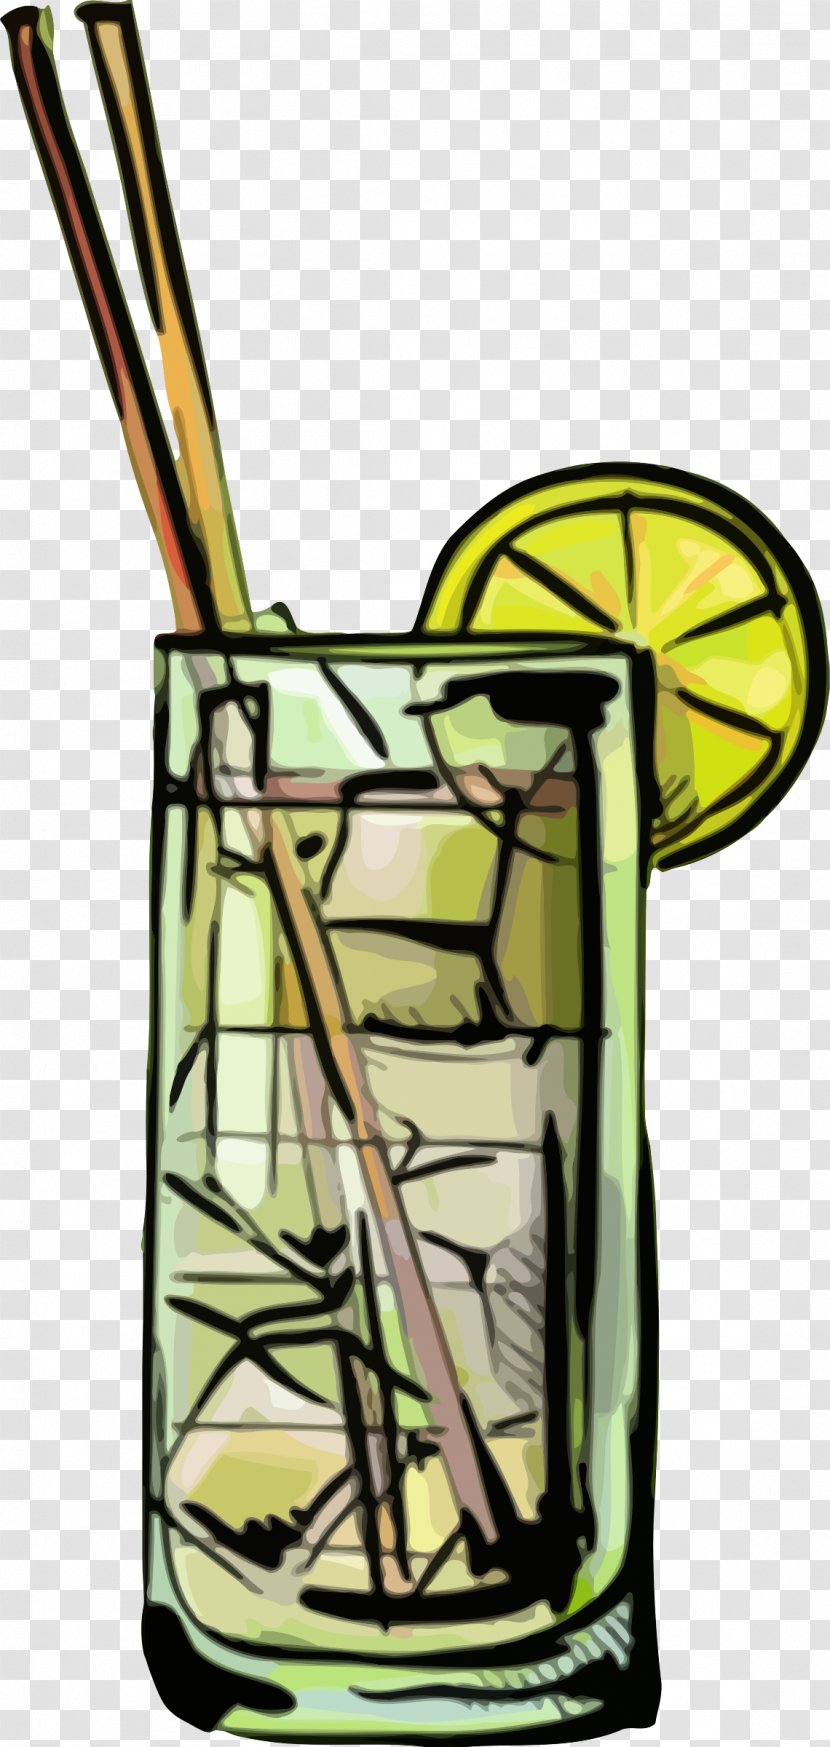 Long Island Iced Tea Cocktail Alcoholic Drink Transparent PNG